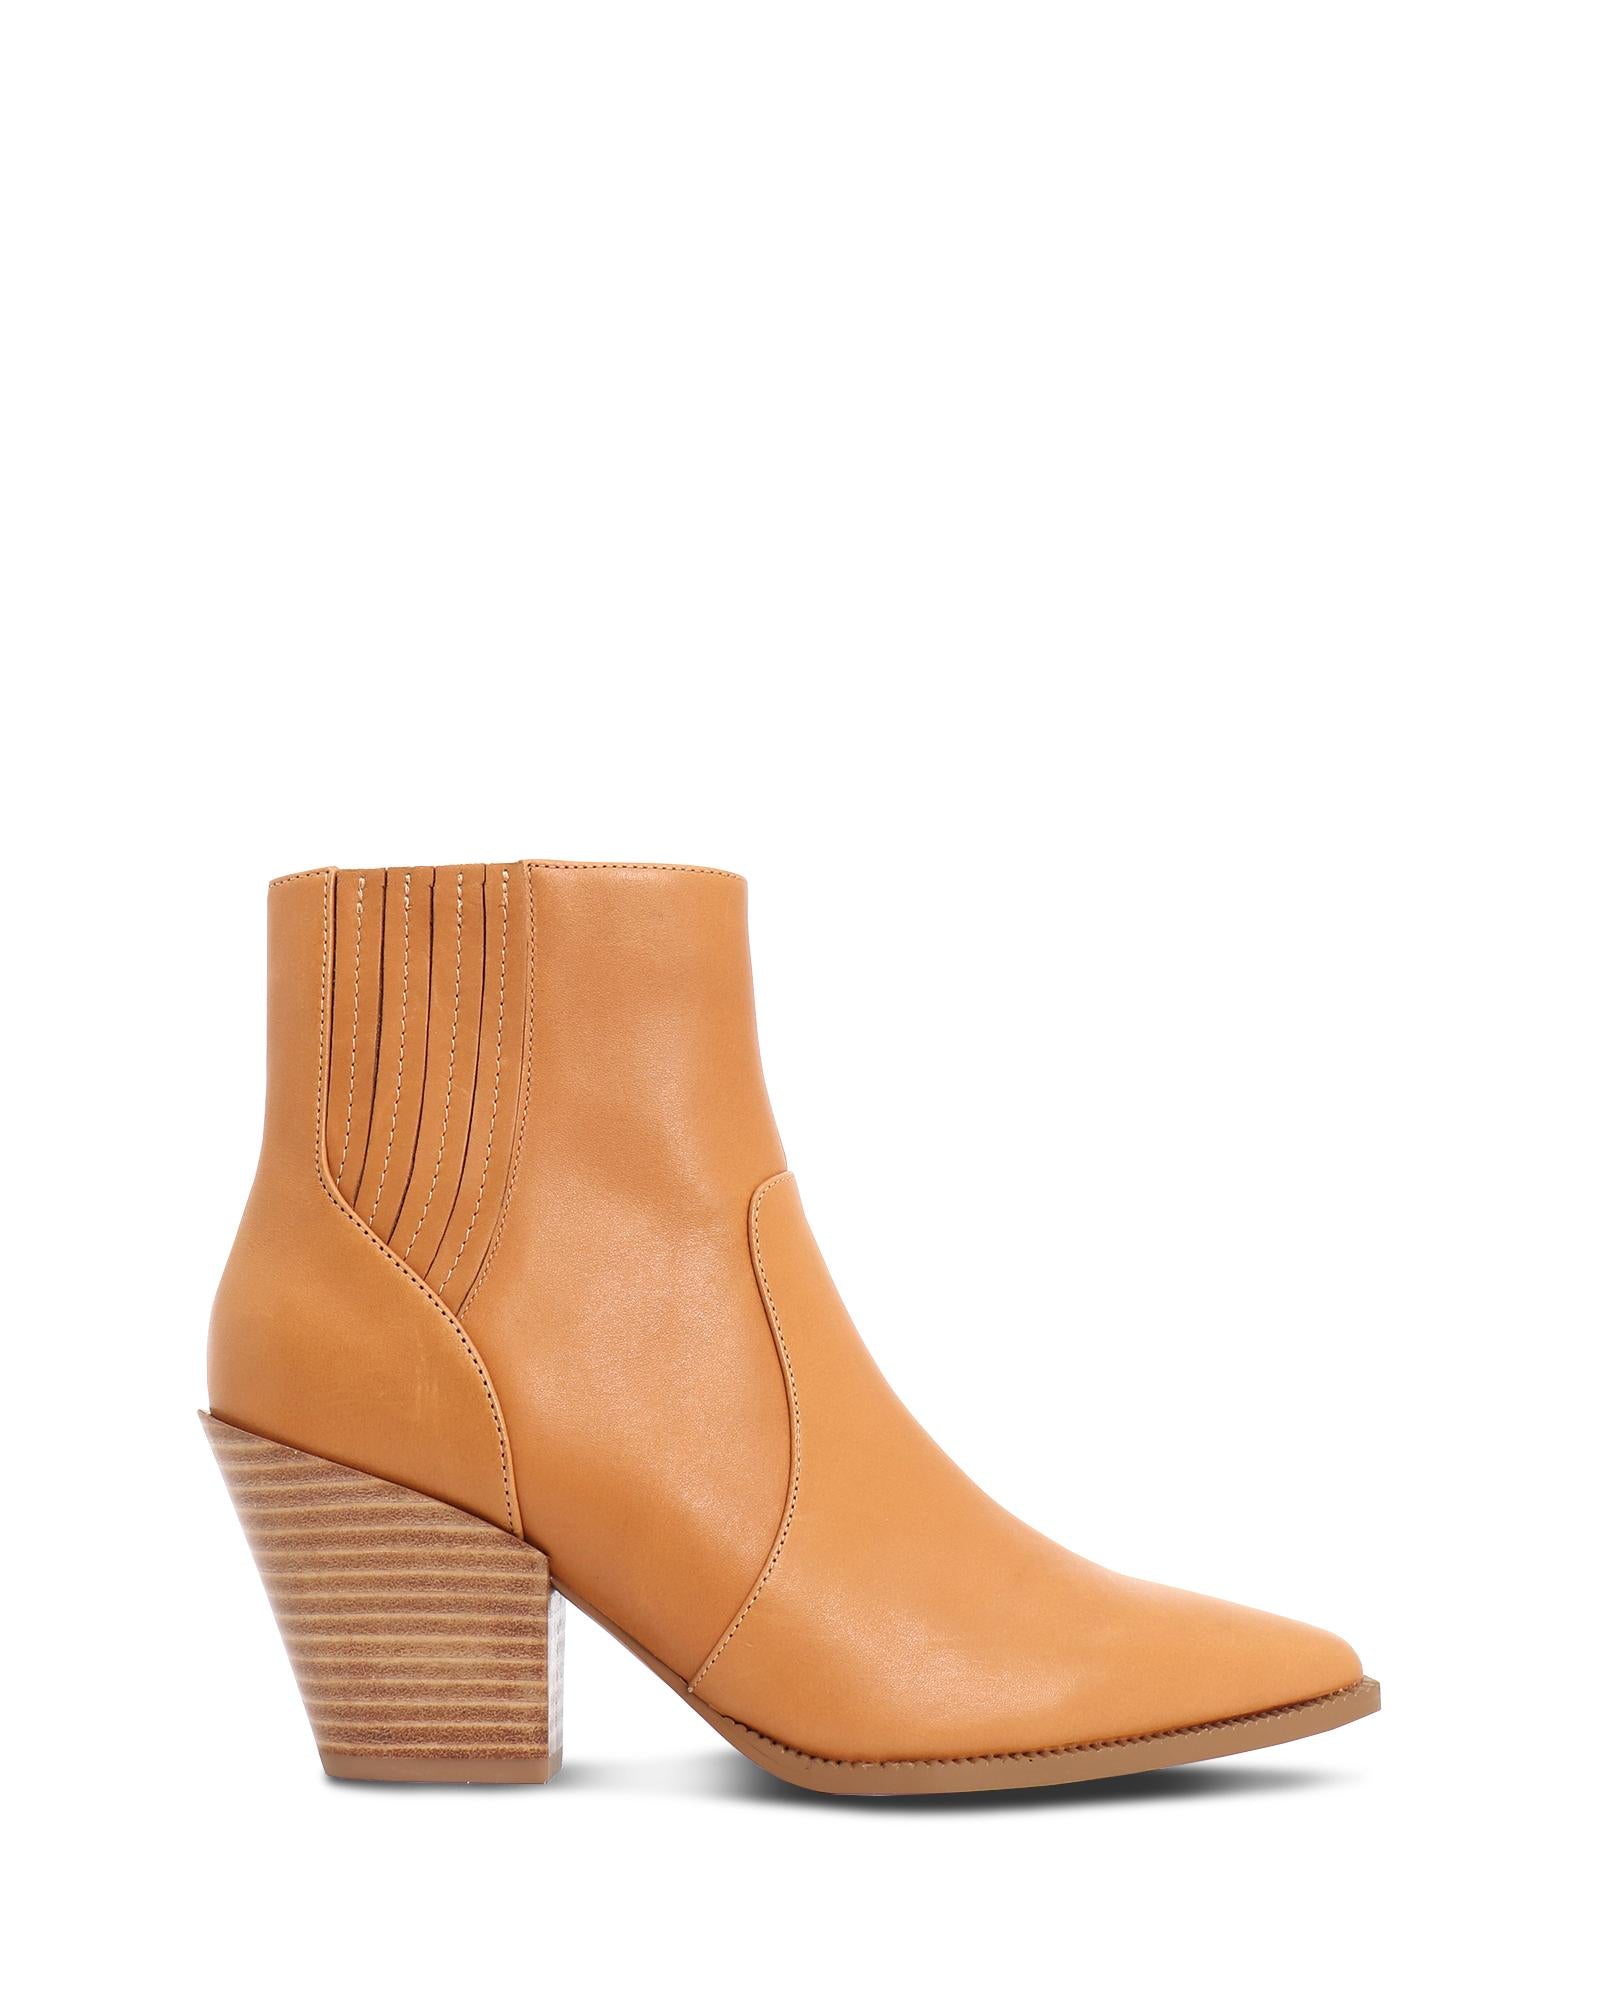 Soho Tan 7.5cm Cuban Heel Ankle Boot with Stitched Elastic Detailing 